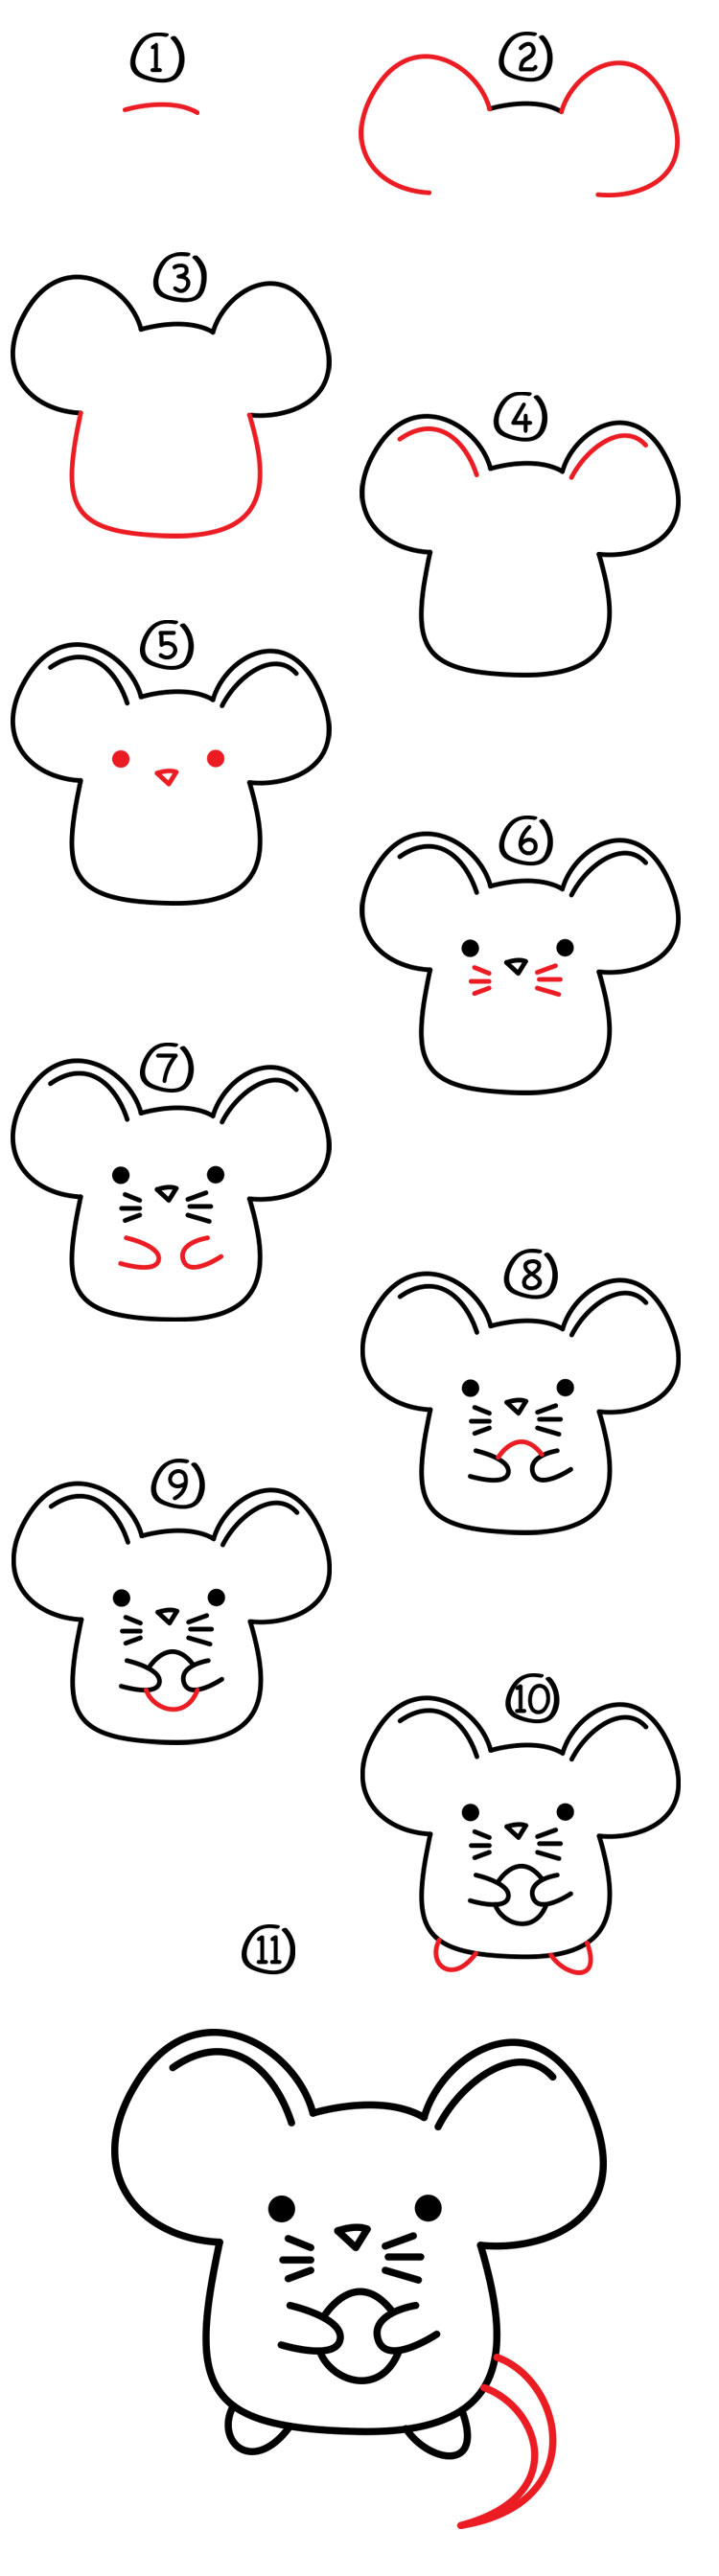 How To Draw A Cartoon Mouse - Art For Kids Hub -